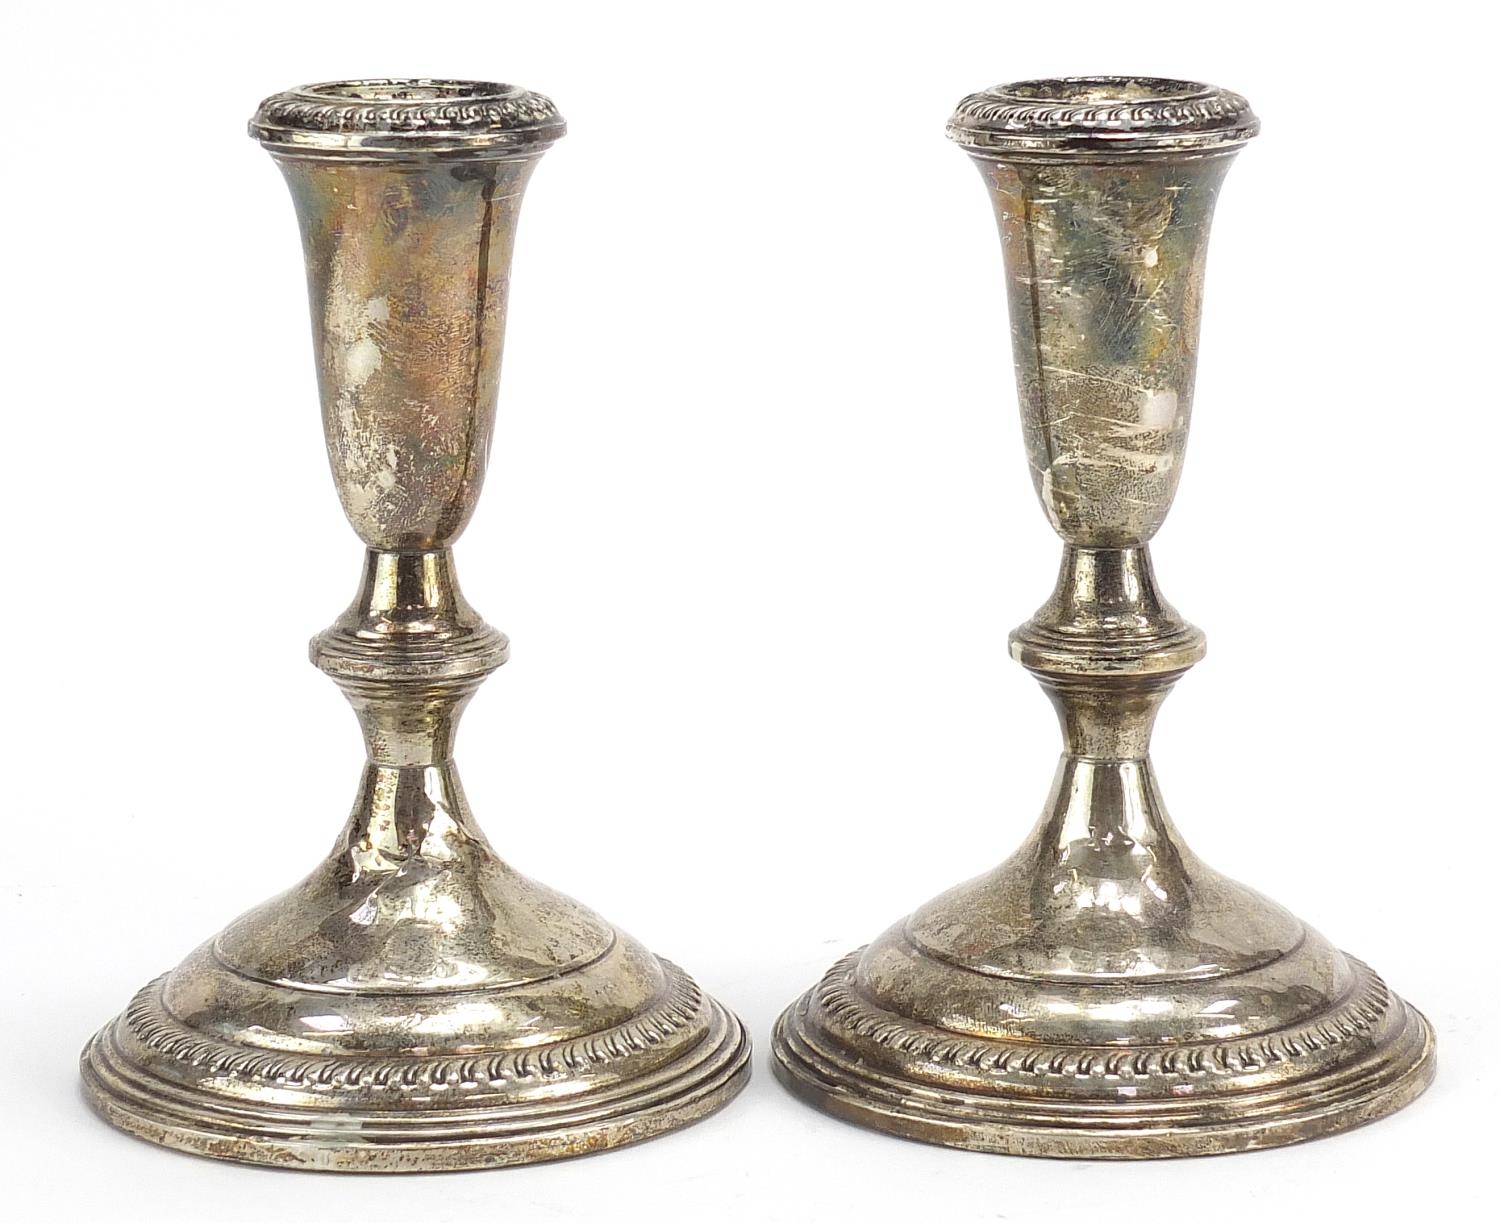 Pair of sterling silver weighted candlesticks, 14.5cm high, 770.0g - Image 2 of 4